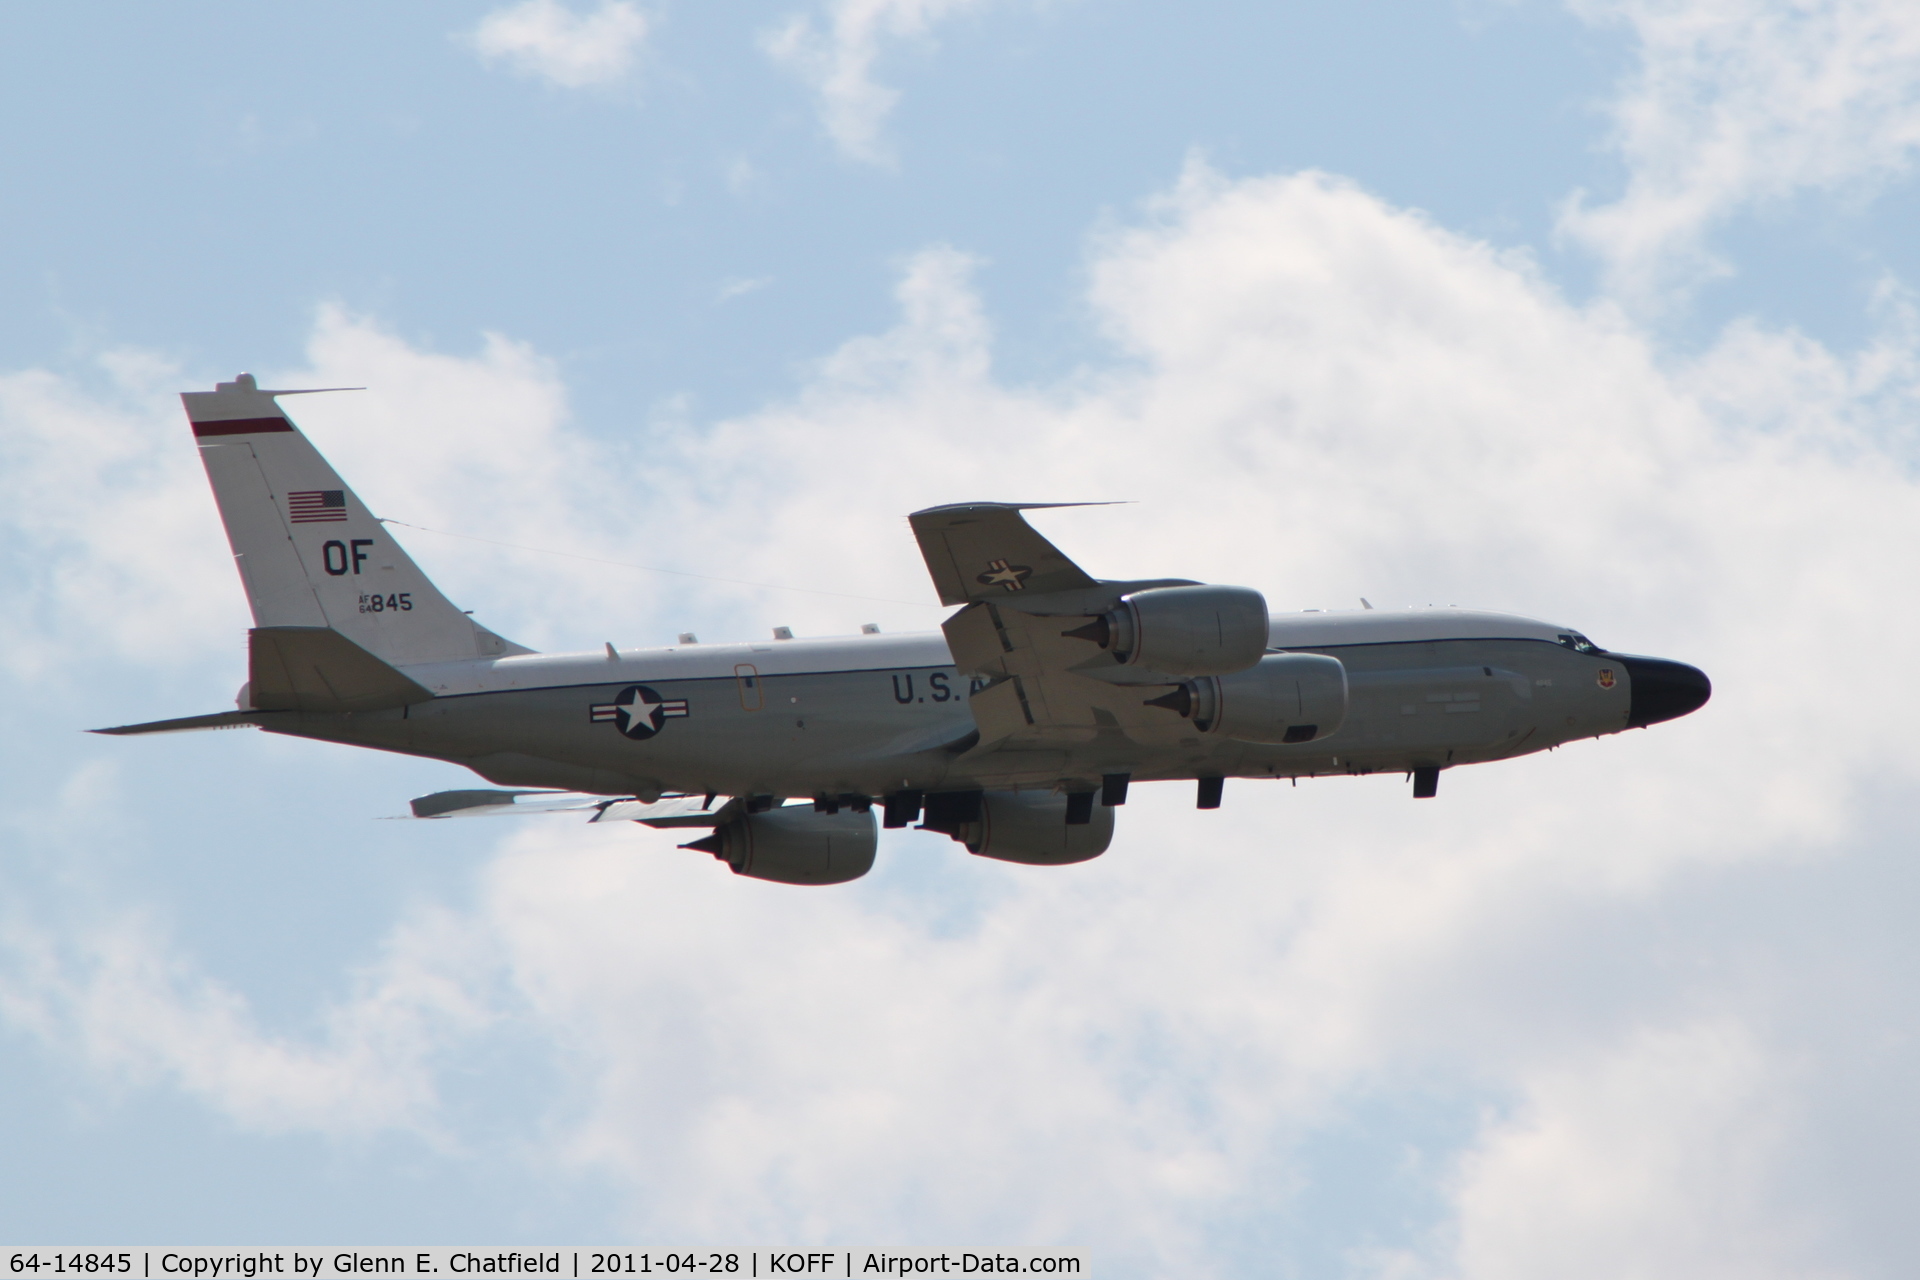 64-14845, Boeing RC-135V Rivet Joint C/N 18785, Doing touch-and-goes and low approaches